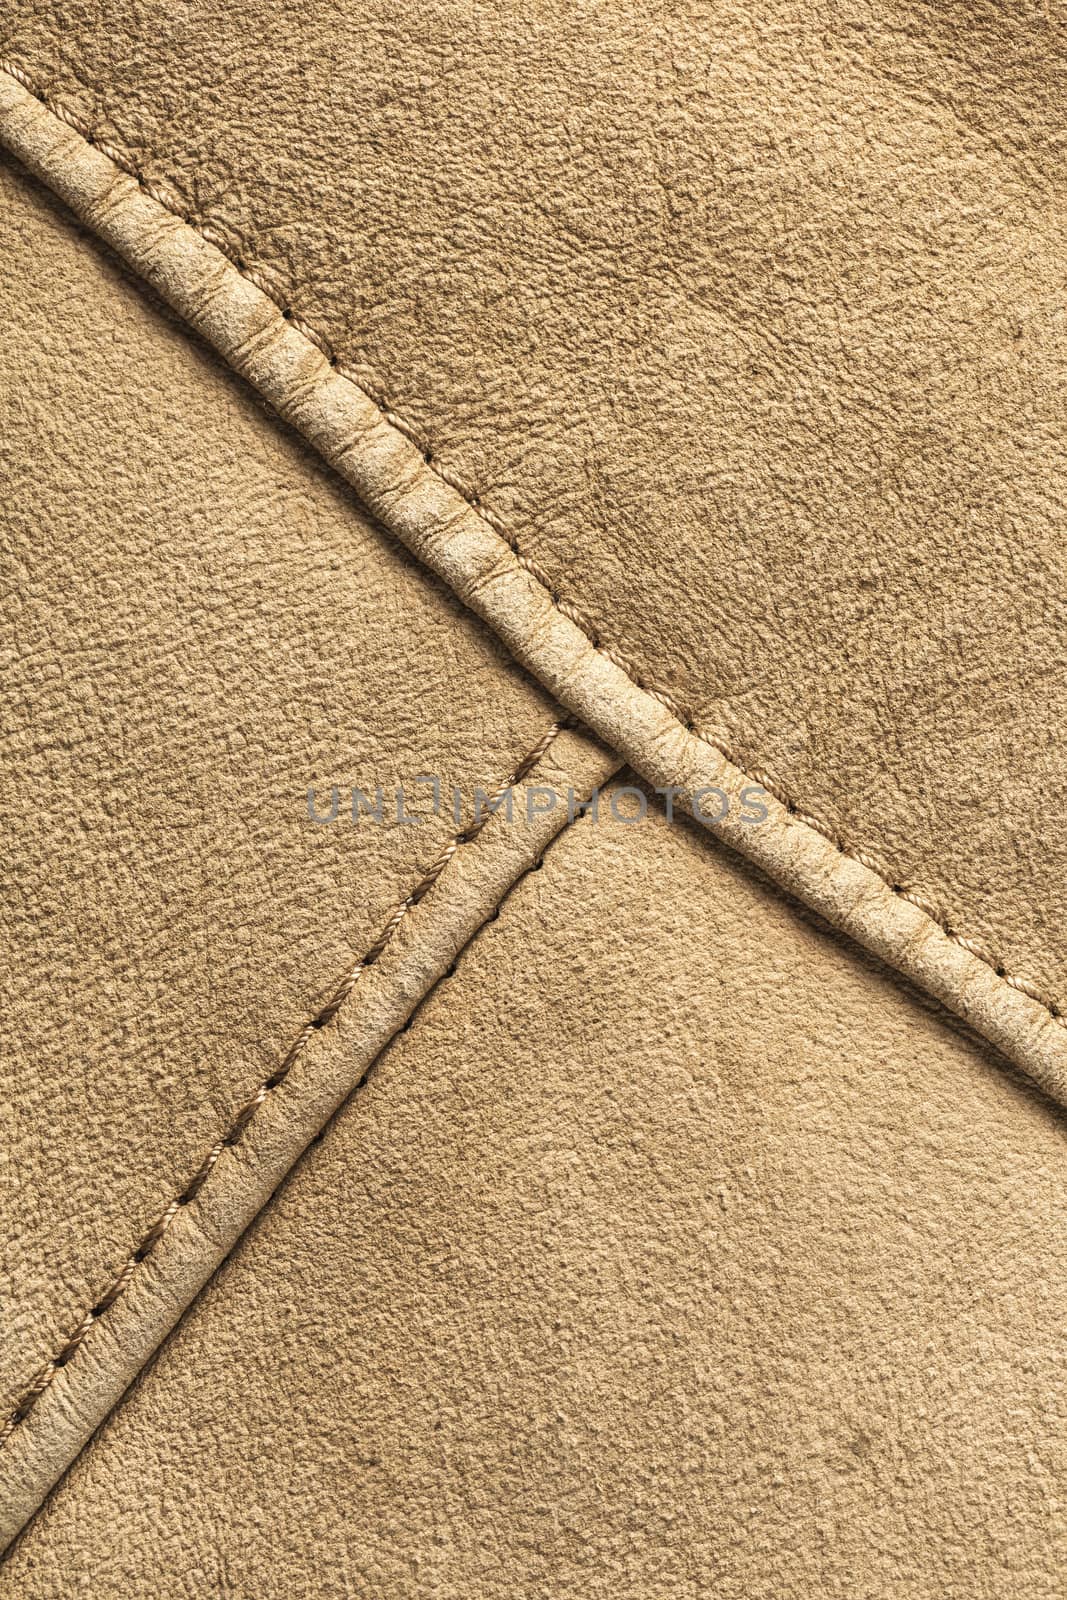 abstract background texture of natural suede leather